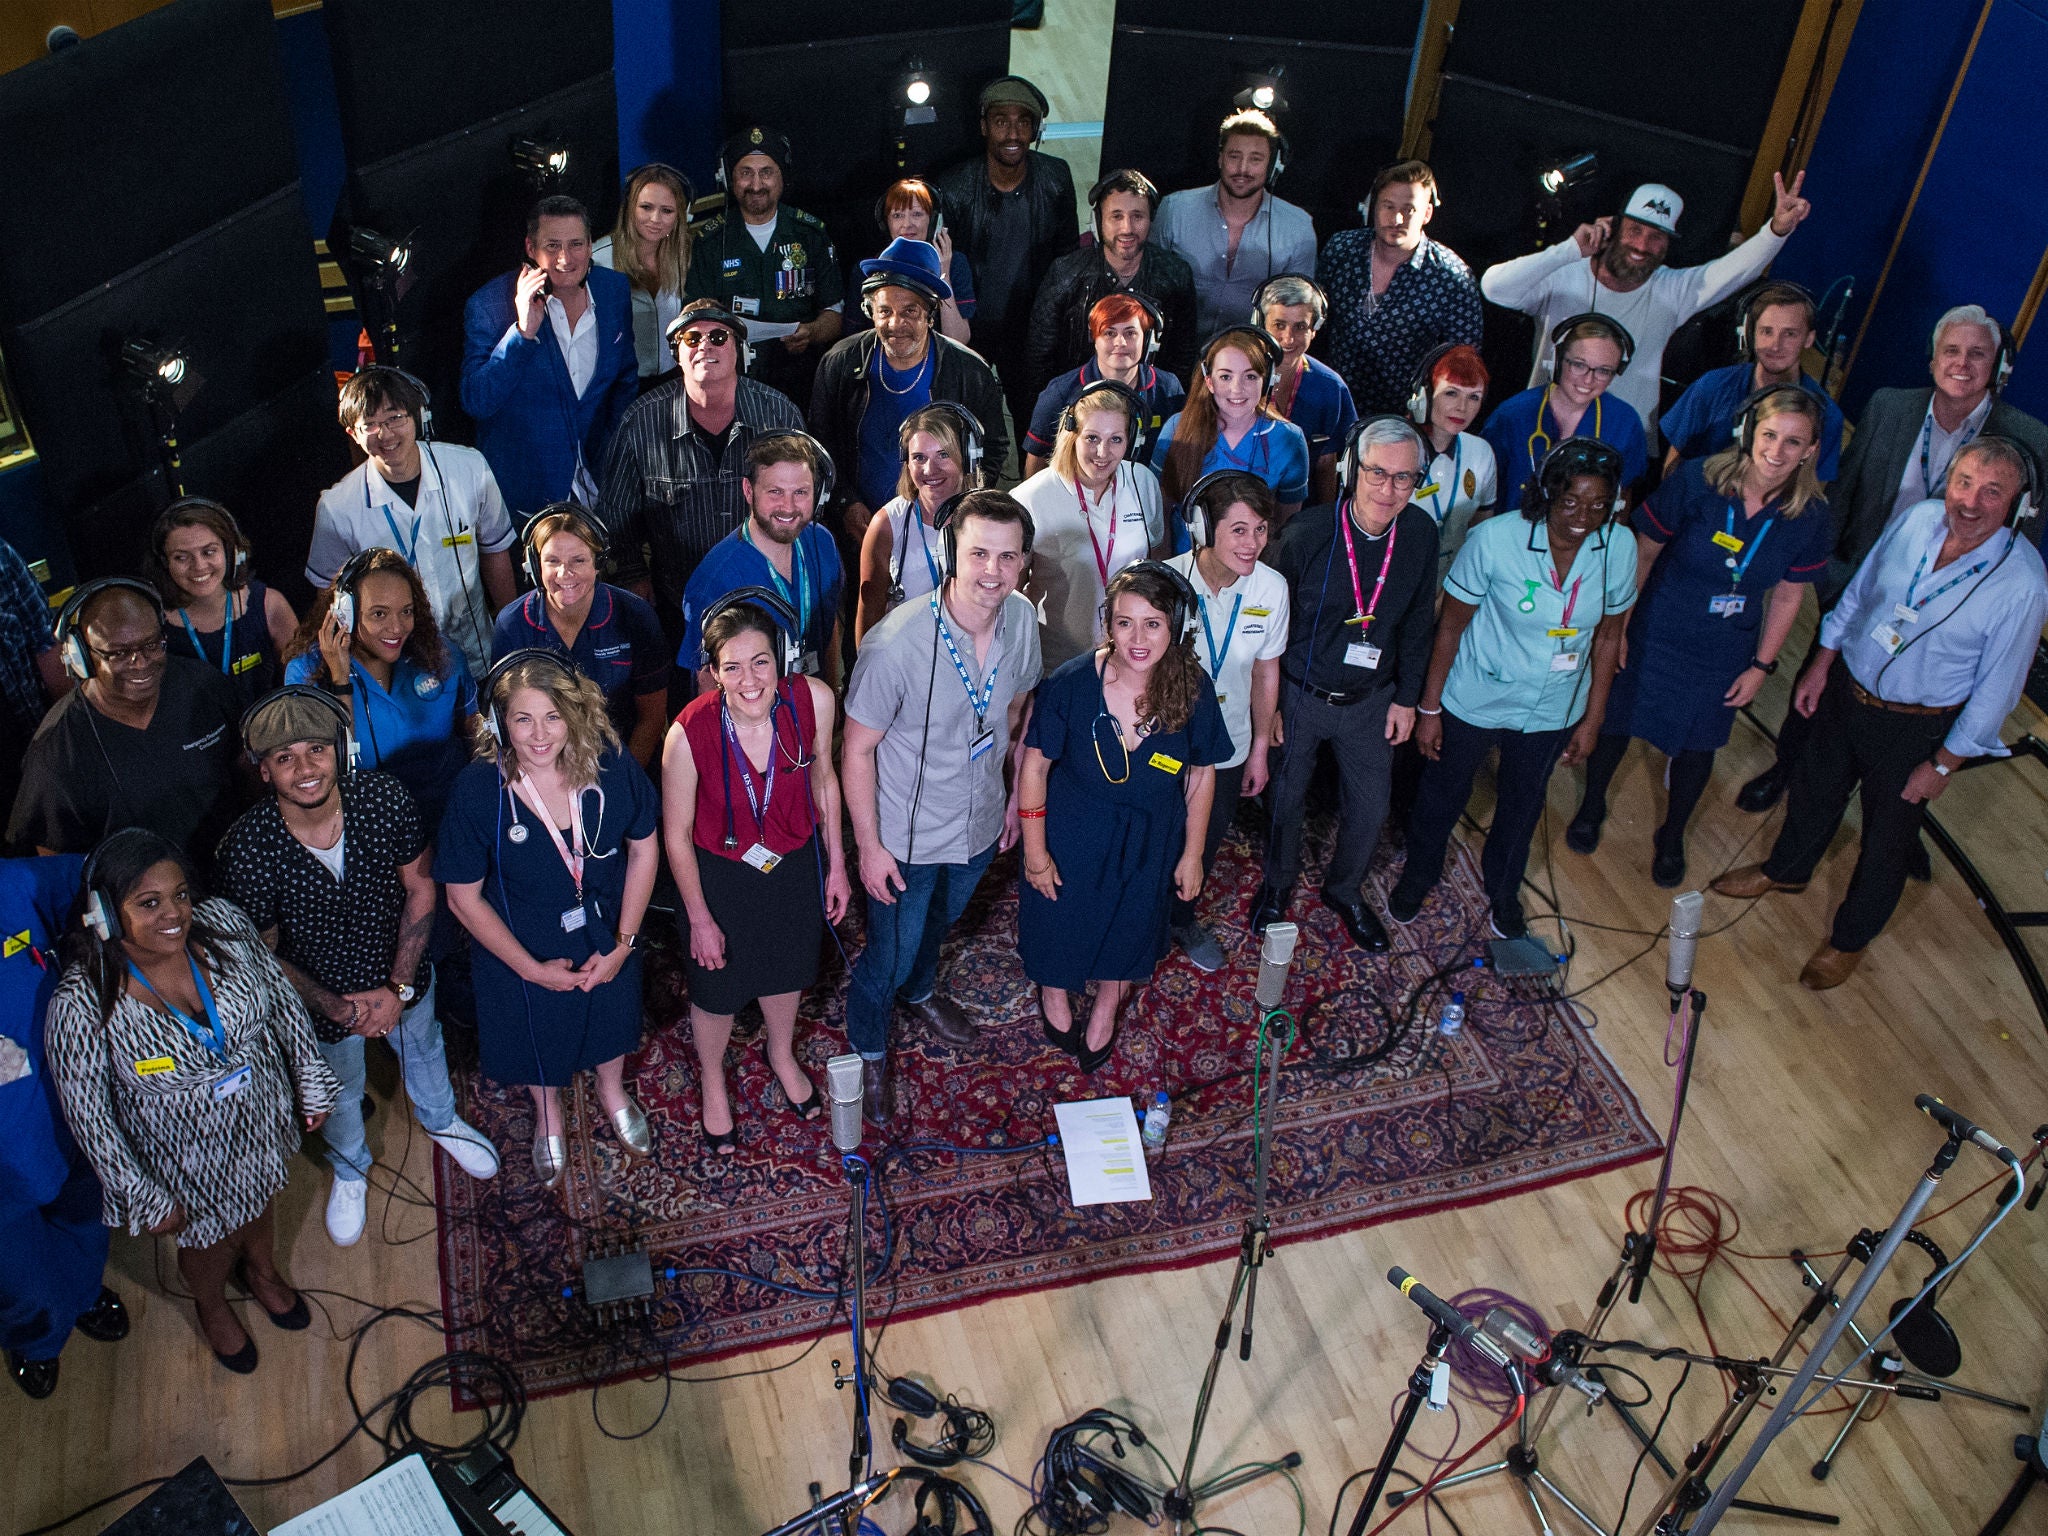 The NHS choir are releasing a single, ‘With a Little Help From My Friends’